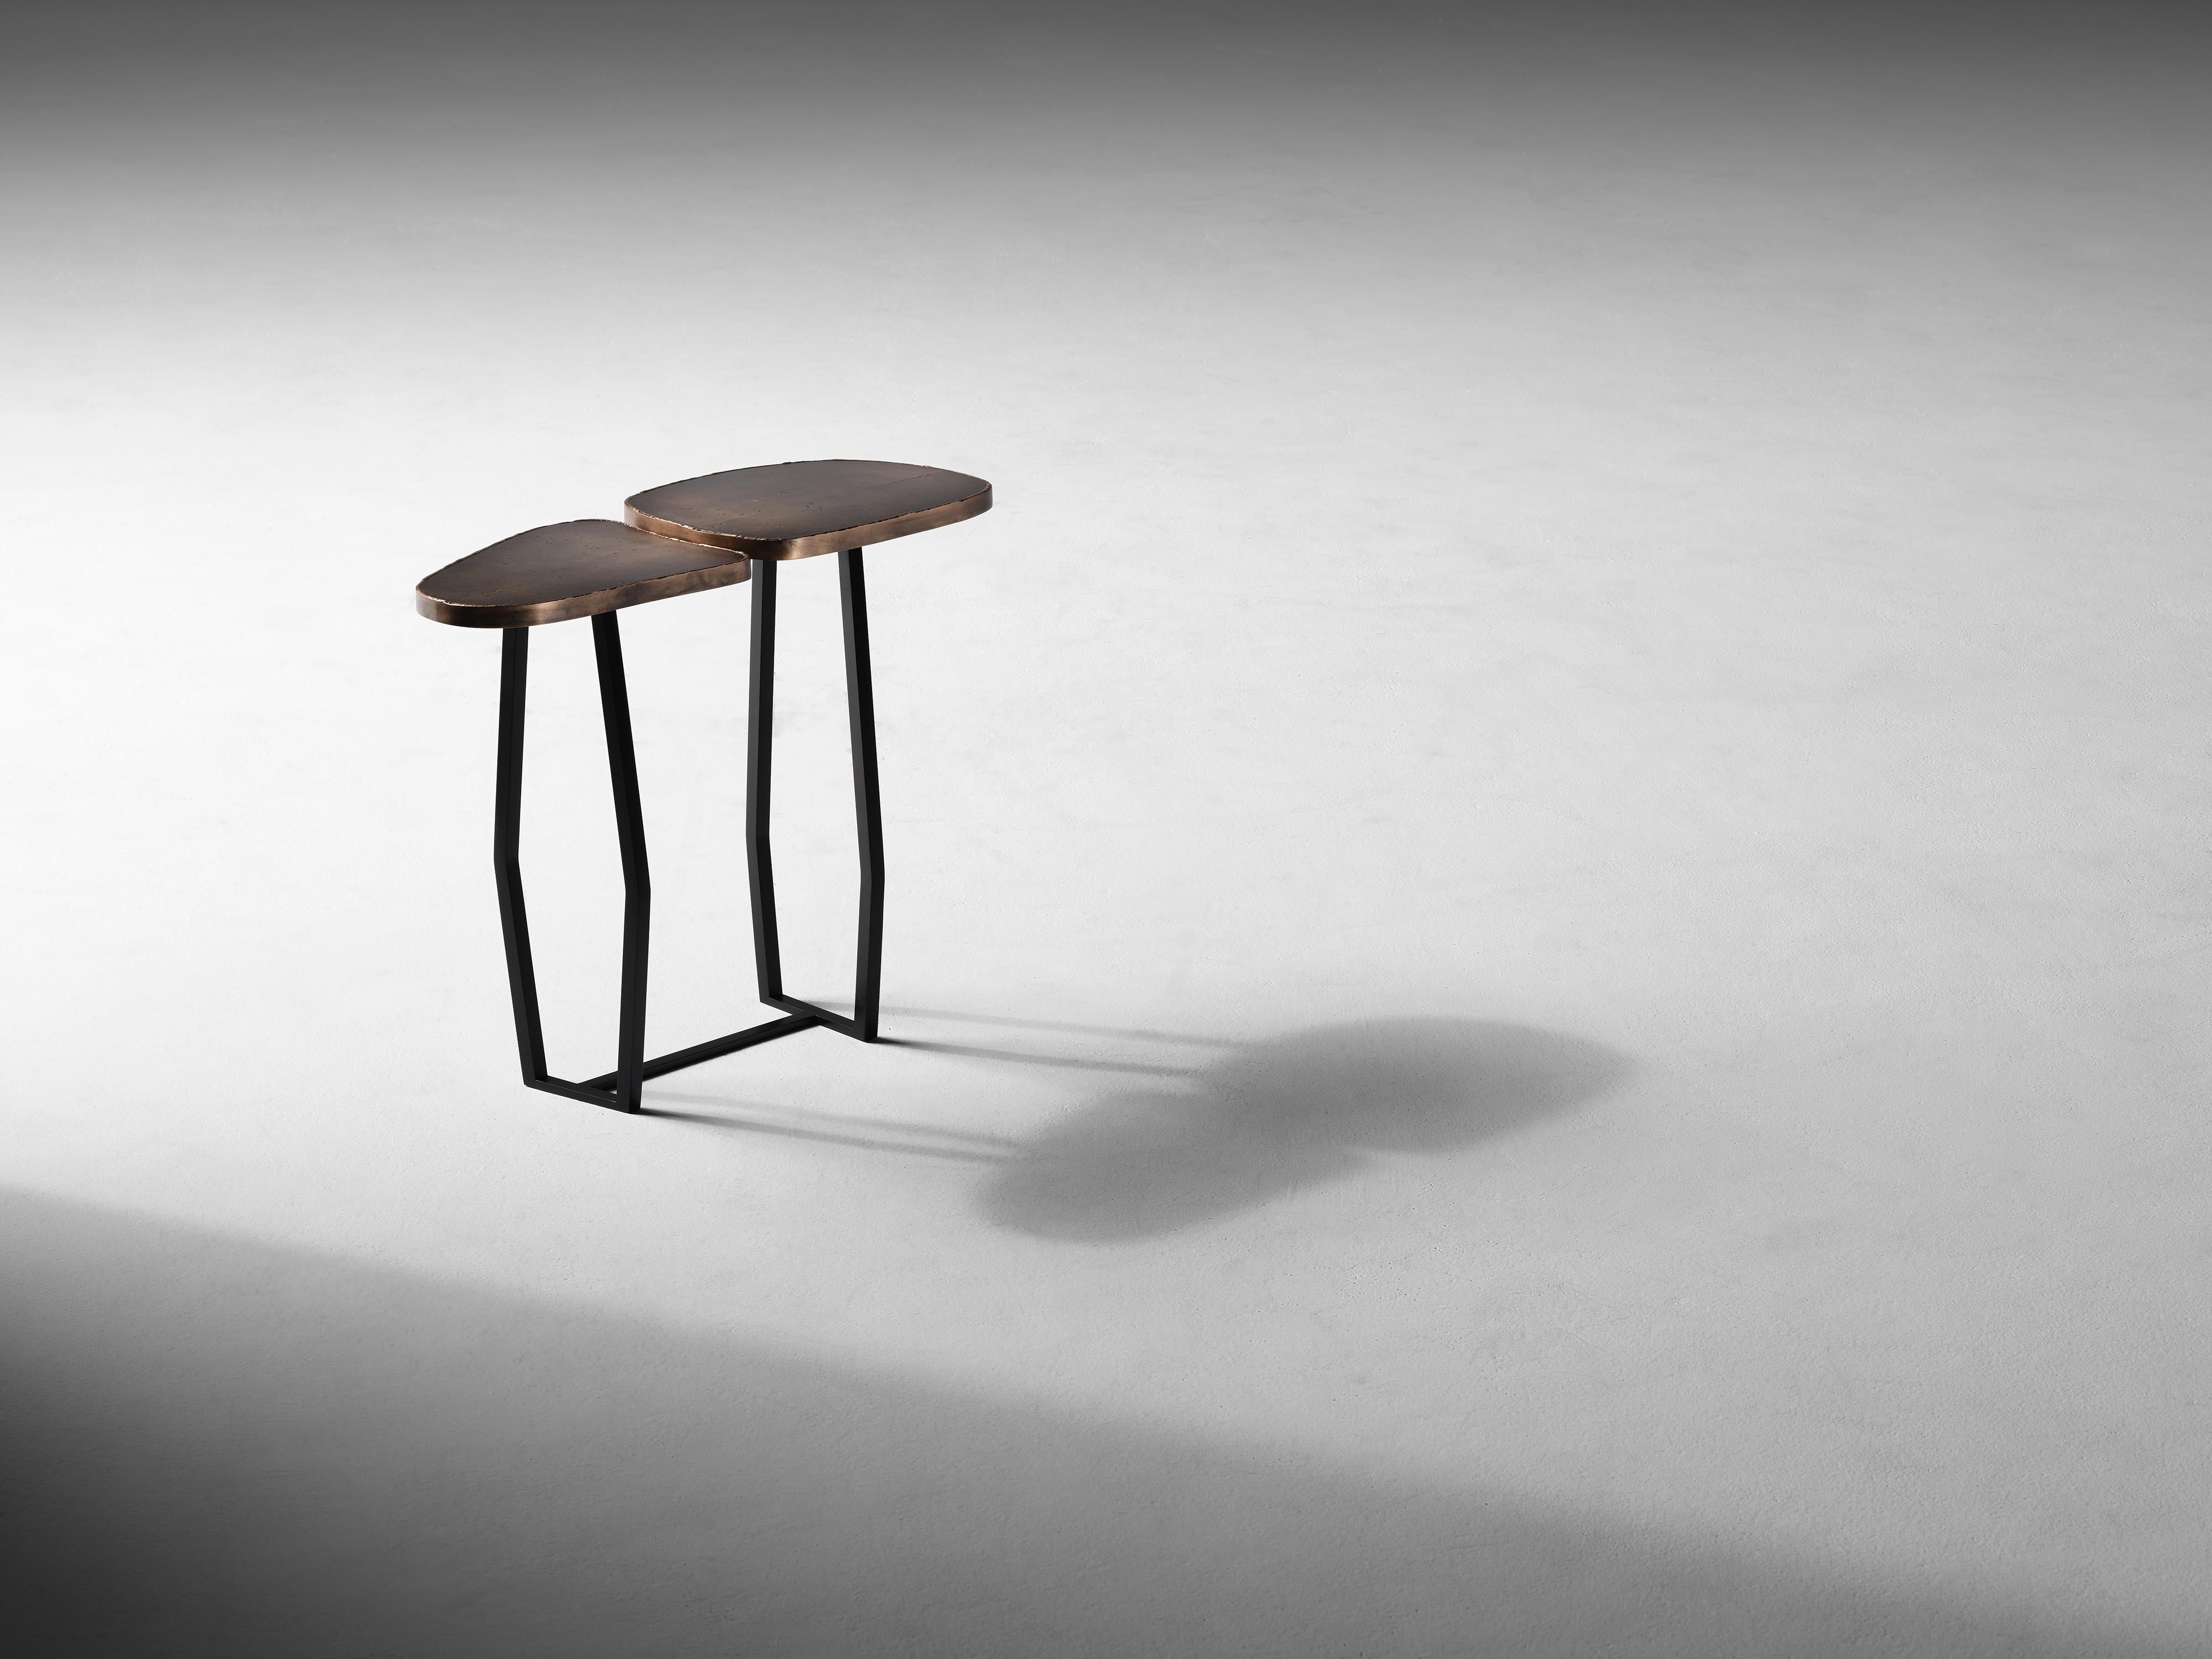 This set of conjoining tables, topped in dappled brass and supported by blackened steel legs, is not just a work of supreme craftsmanship, but of stunning elegance. With its two surfaces separated ever so slightly, the piece possesses a certain